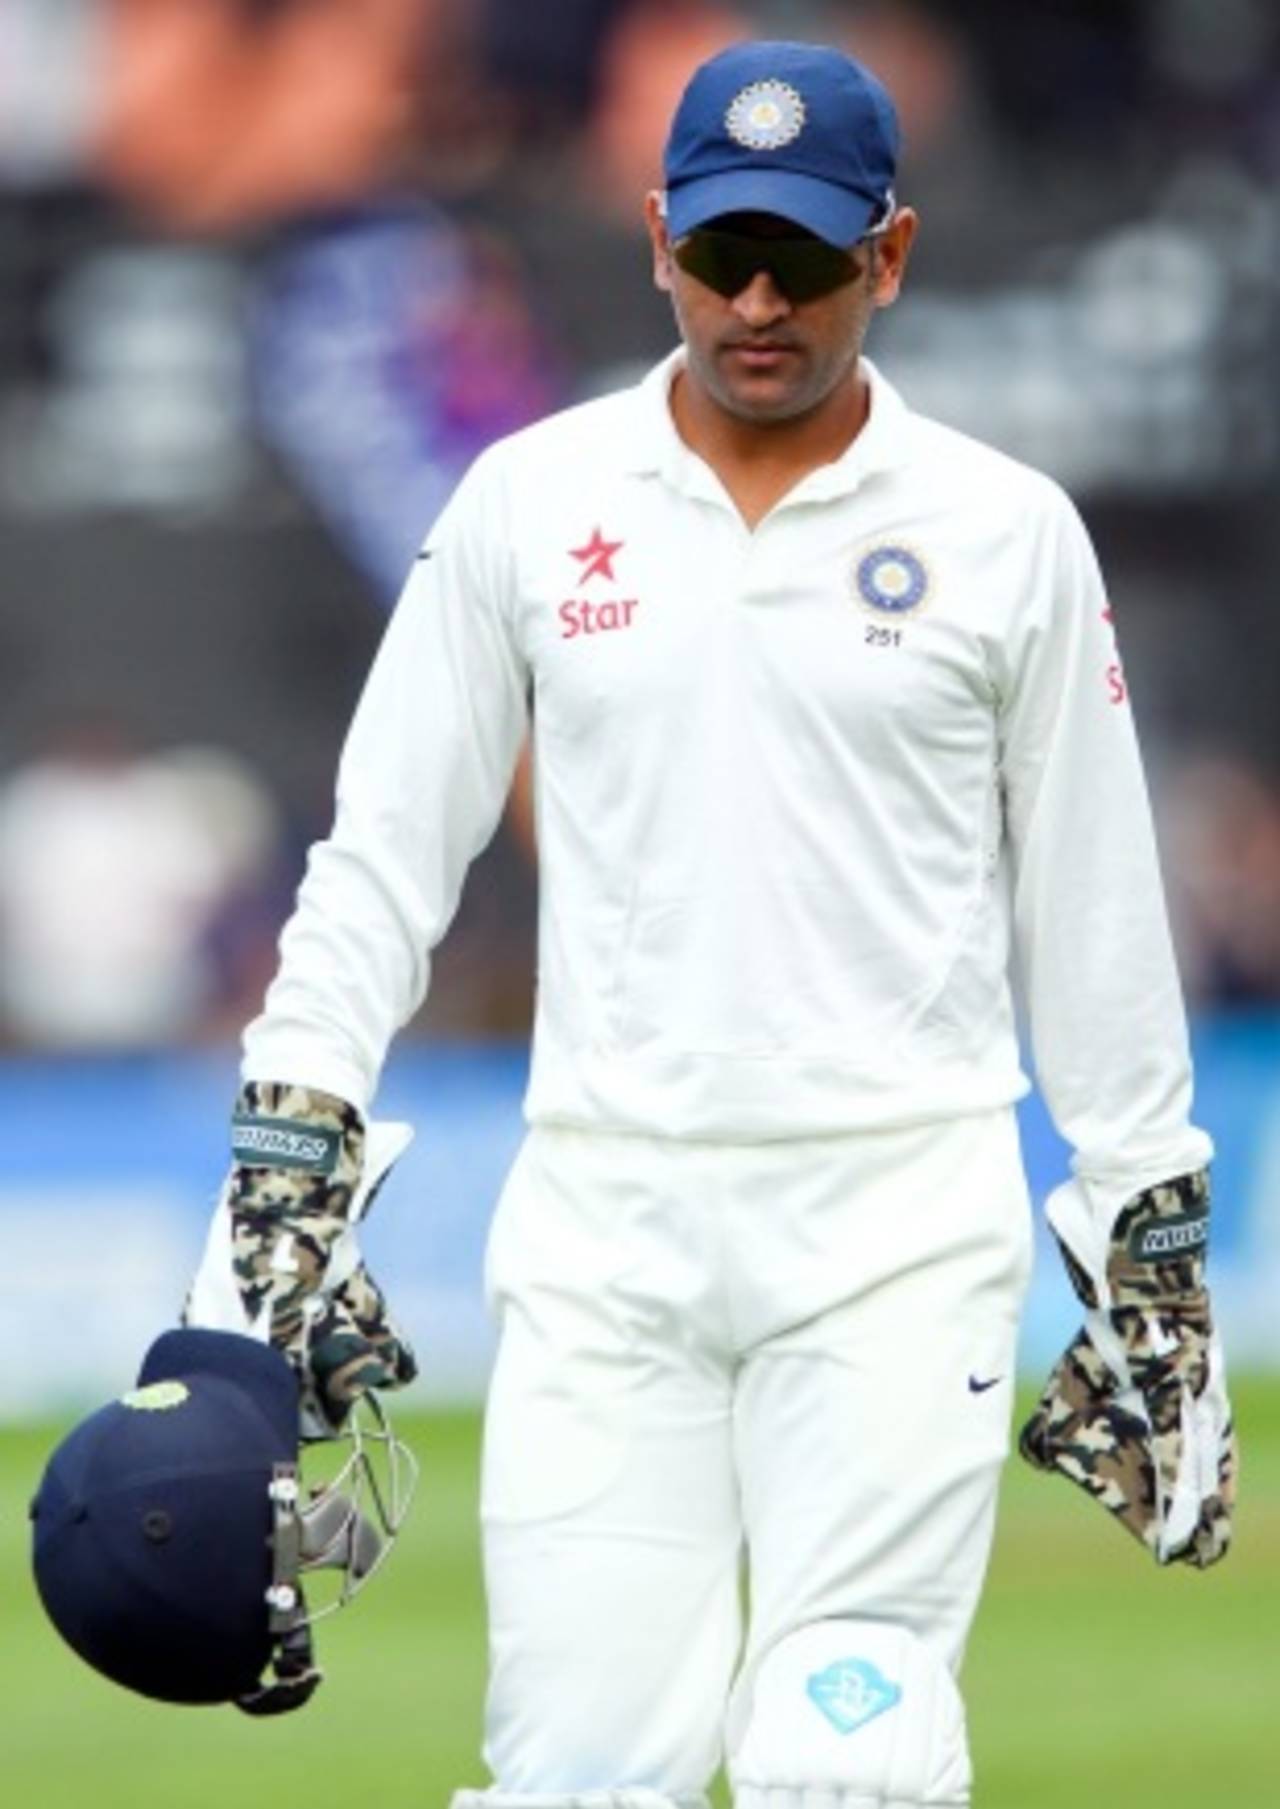 It is important that MS Dhoni's name is cleared - whether by him or his superiors&nbsp;&nbsp;&bull;&nbsp;&nbsp;Getty Images